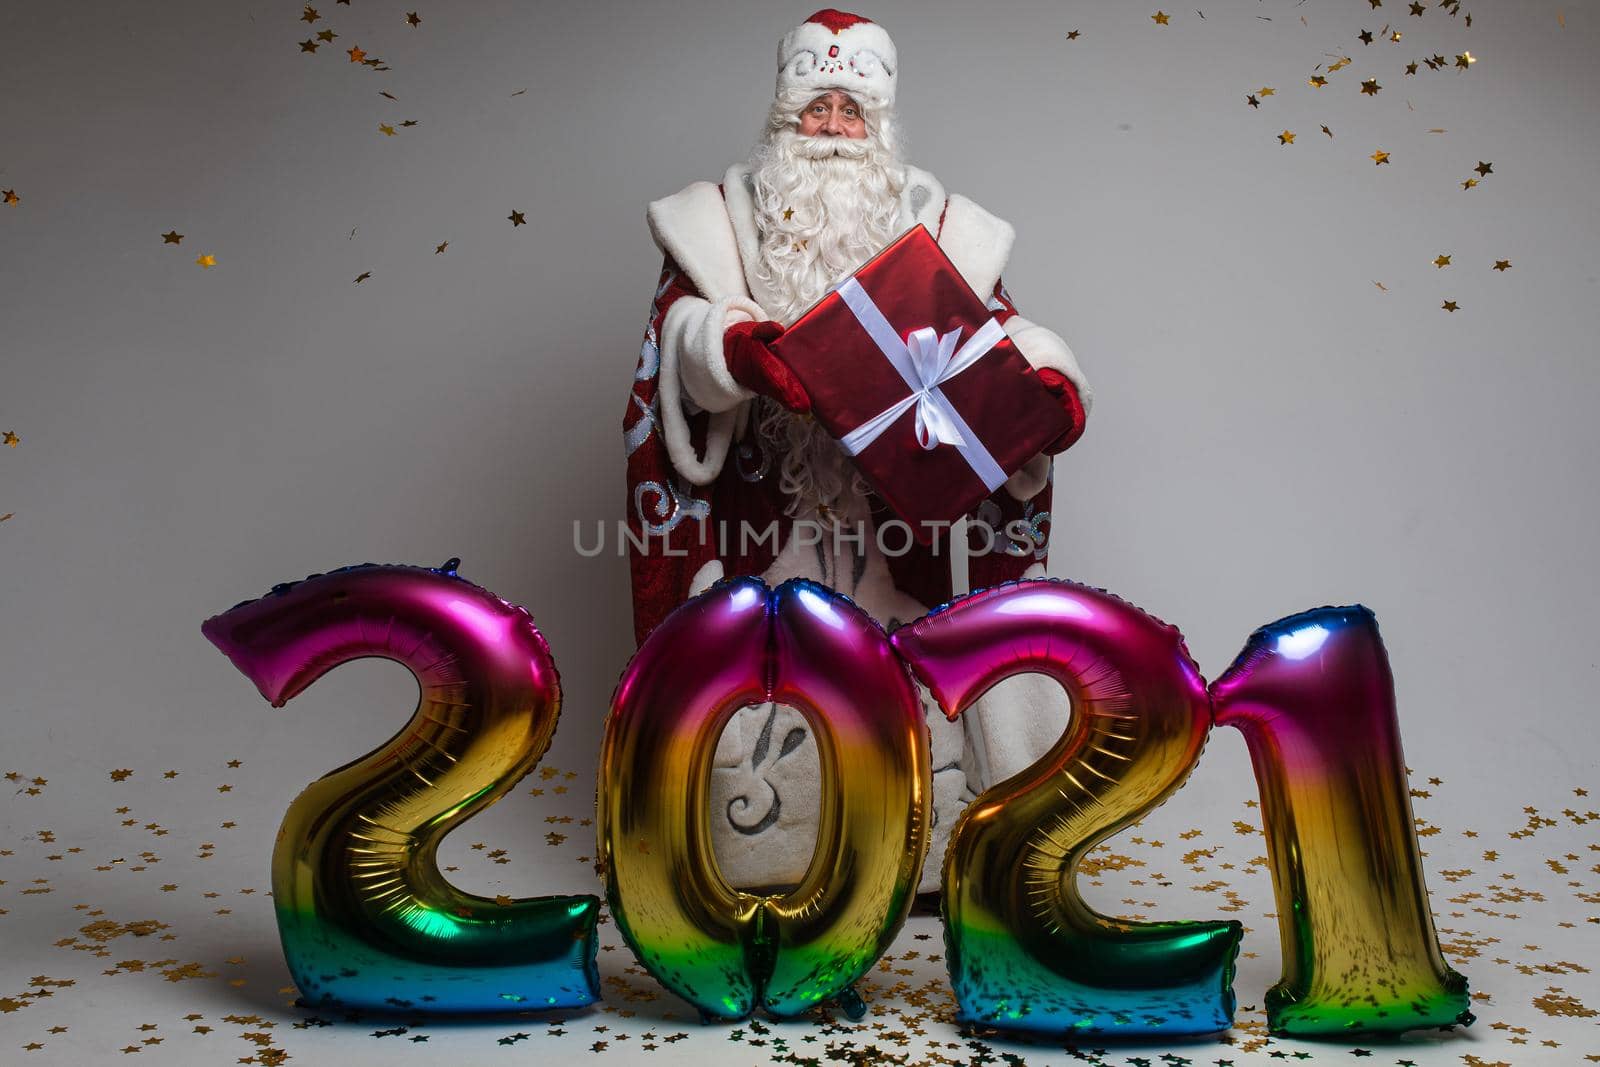 Colourful balloons in shape of 2021 and Santa with gift celebrating xmas and new year by StudioLucky